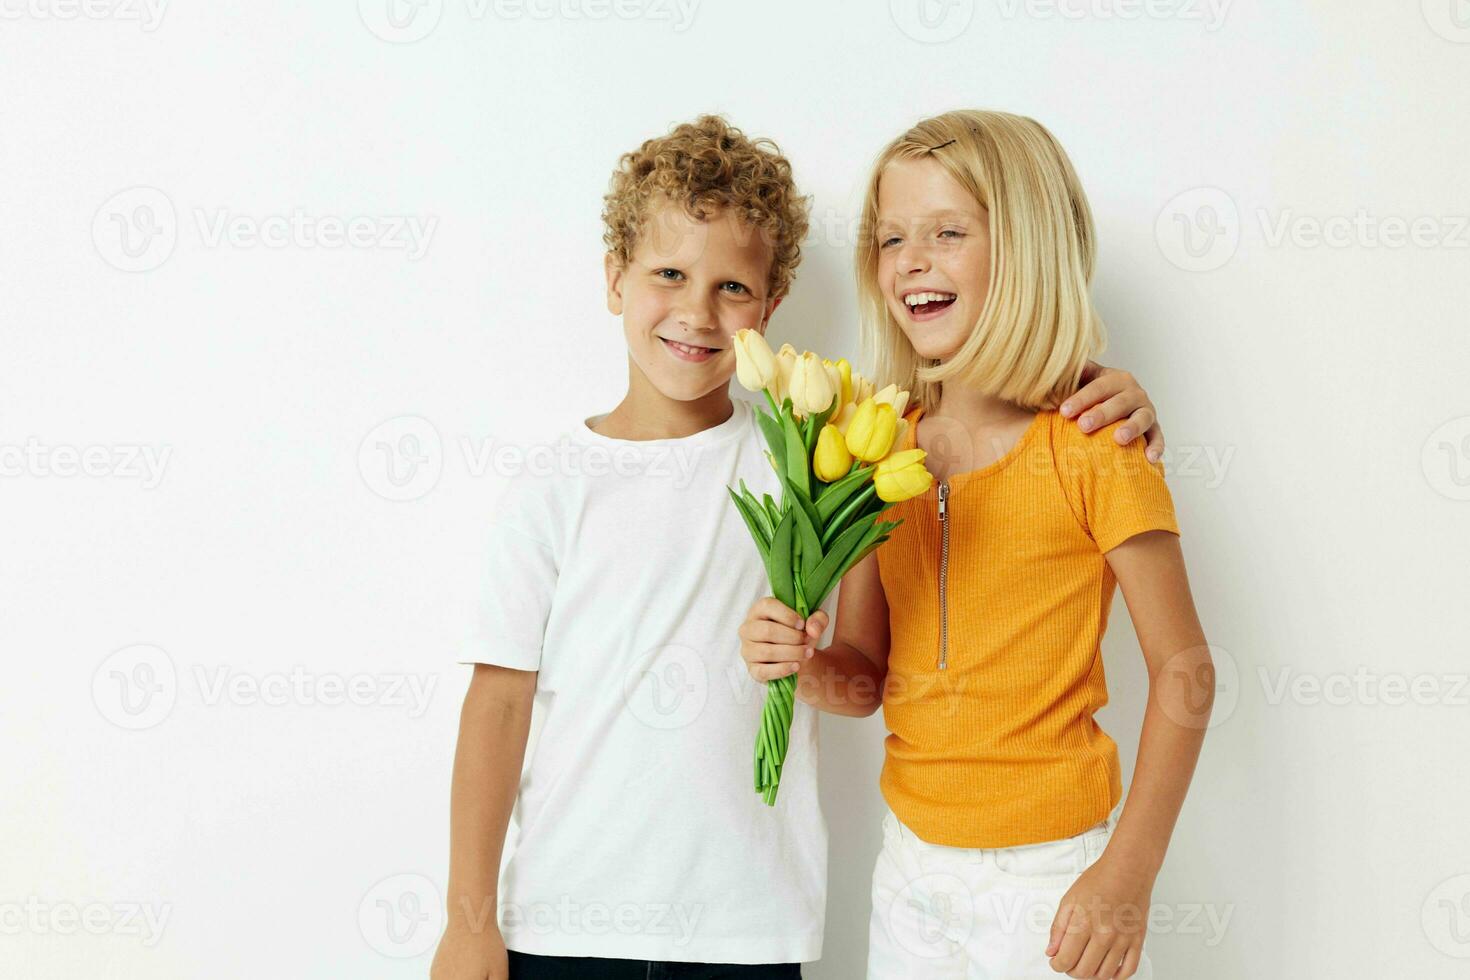 two joyful children fun birthday gift surprise bouquet of flowers isolated background unaltered photo